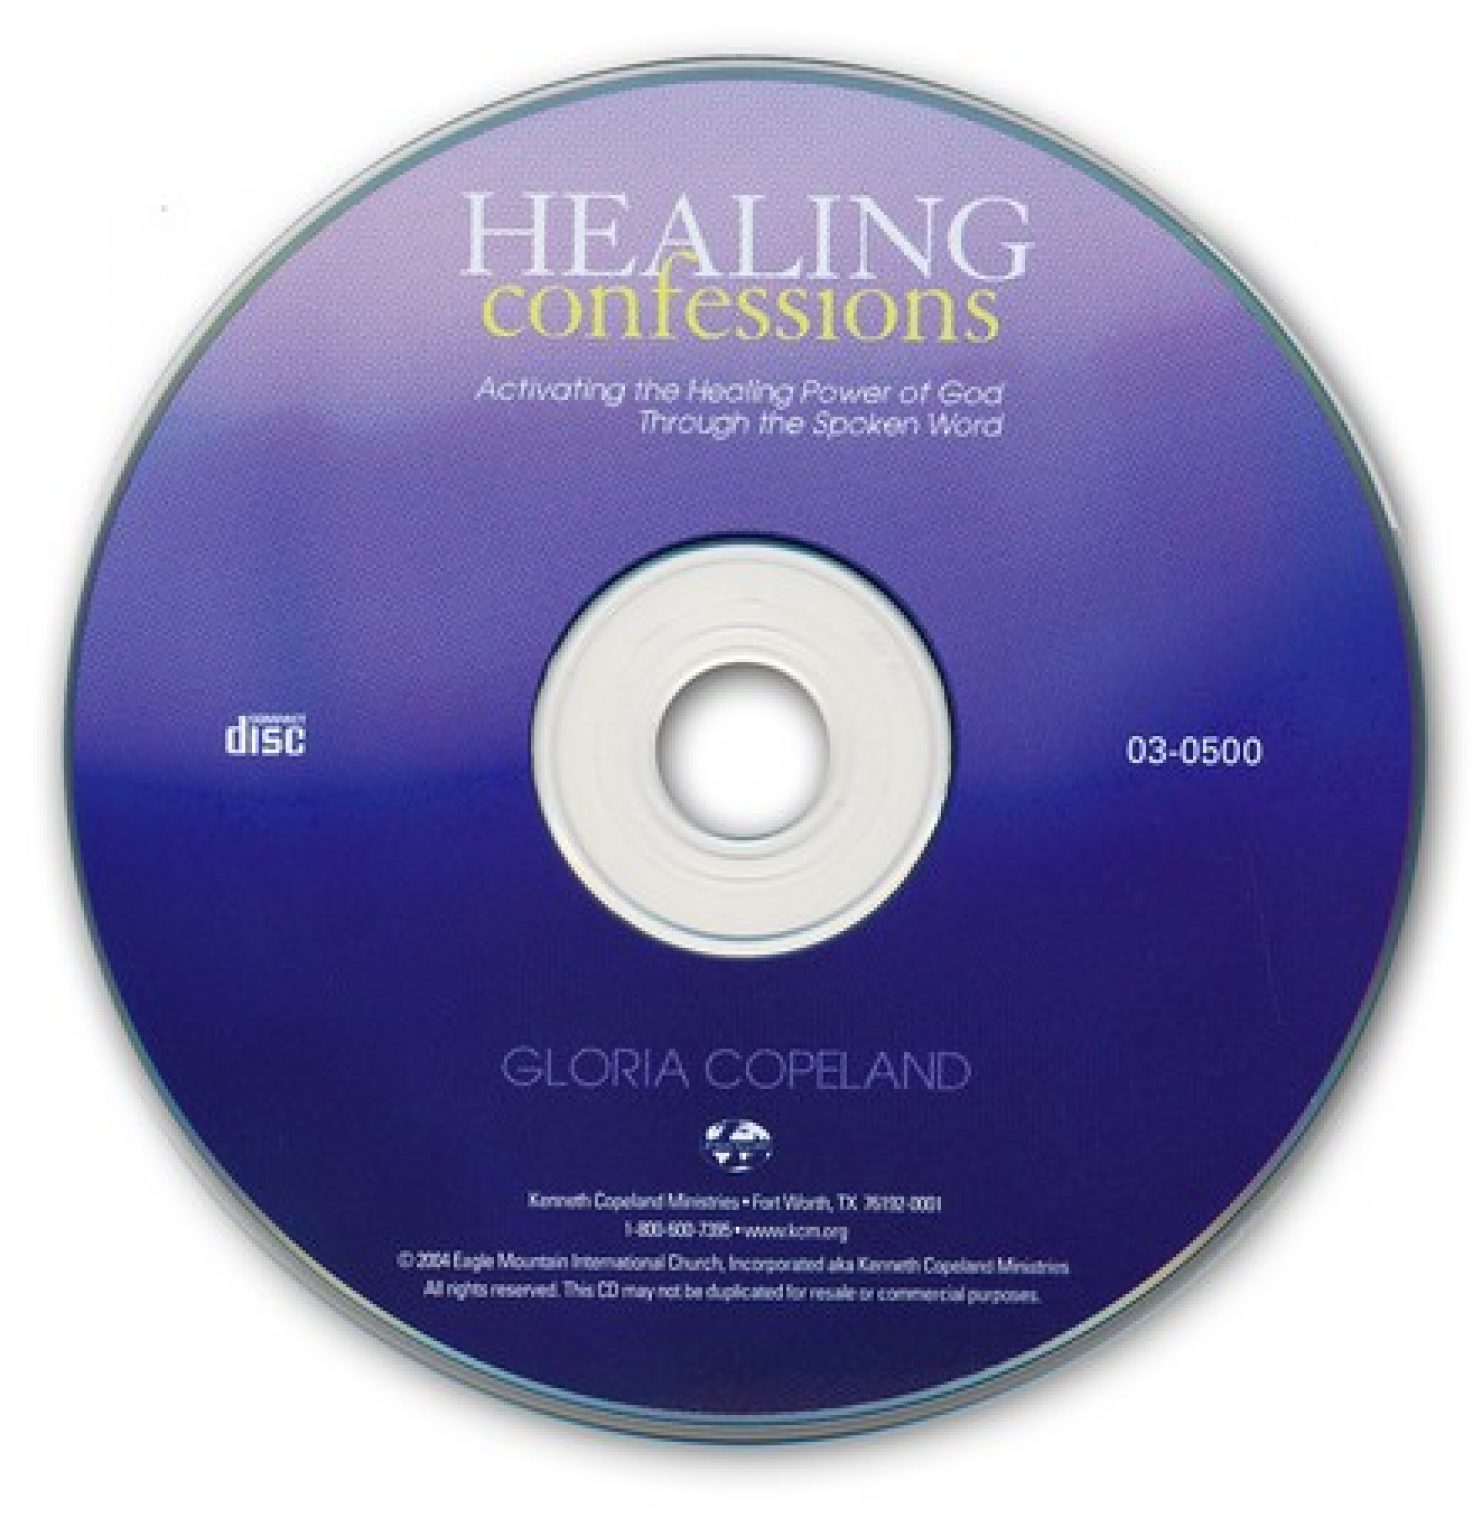 healing confessions activating the healing power of god through the spoken word 4